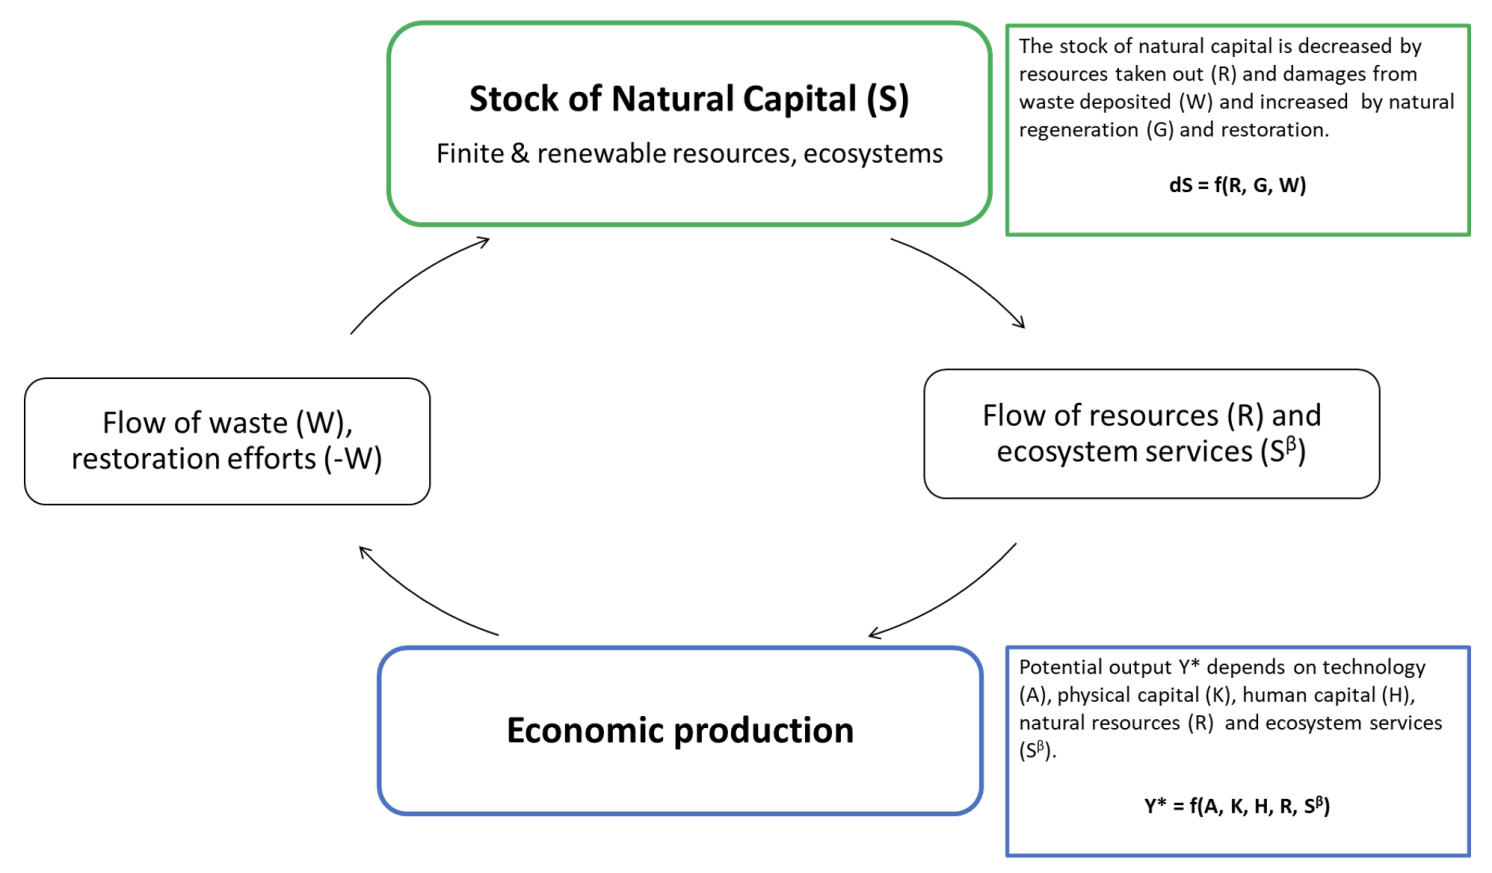 Figure 1 Feedback loops between natural capital and the economic production system